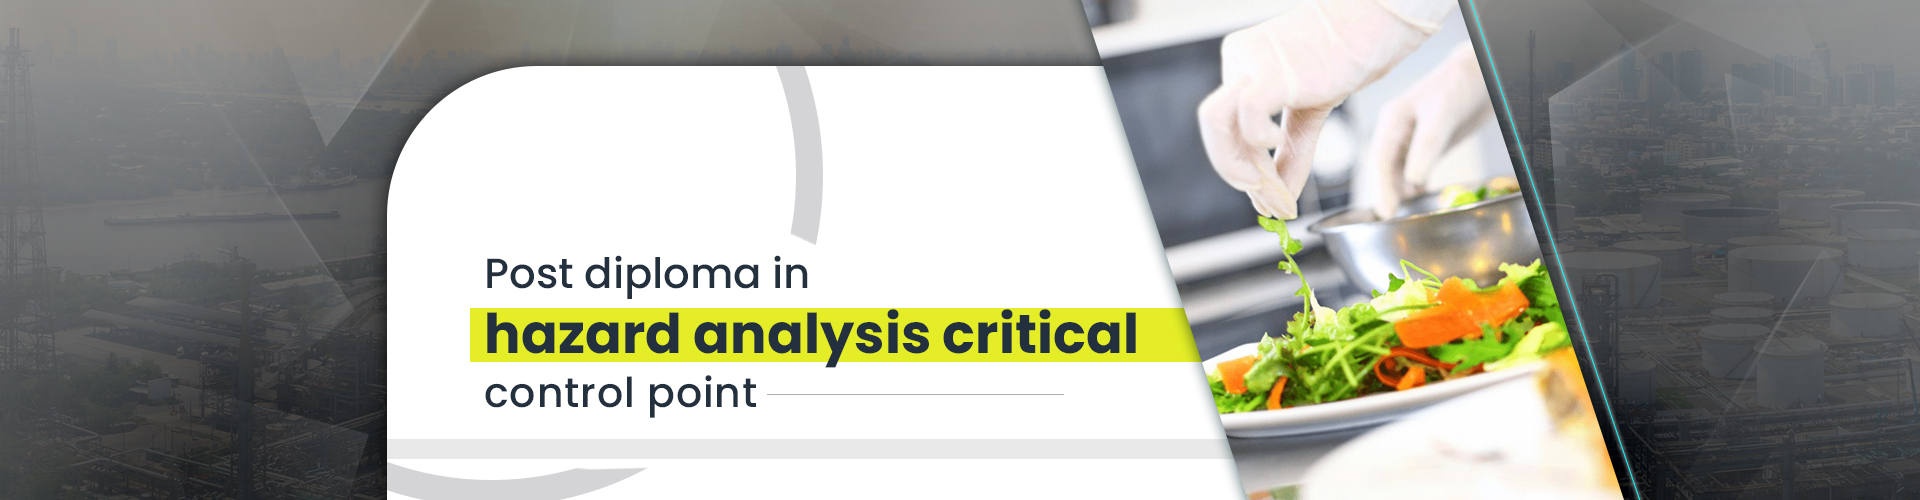 Post diploma in hazard analysis critical control point